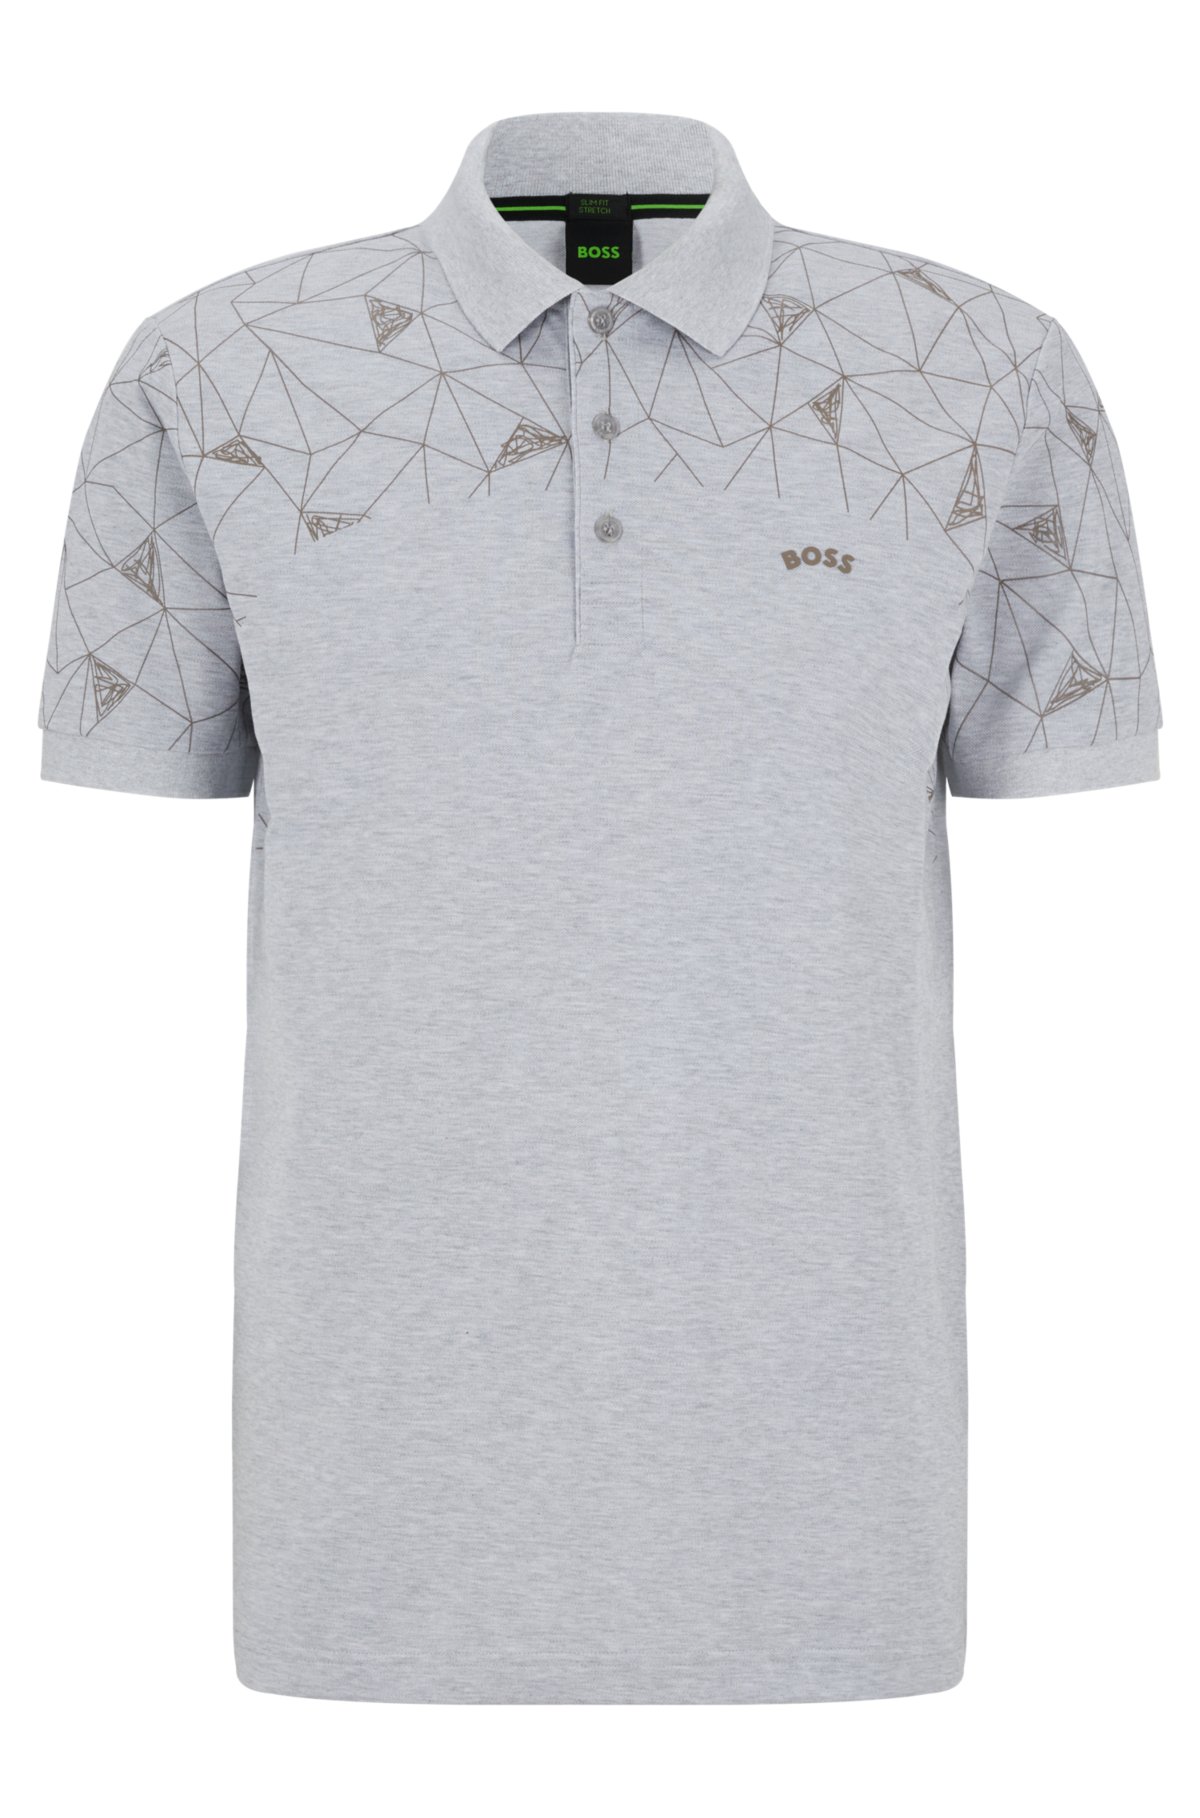 BOSS - Cotton-blend slim-fit polo artwork grid shirt with